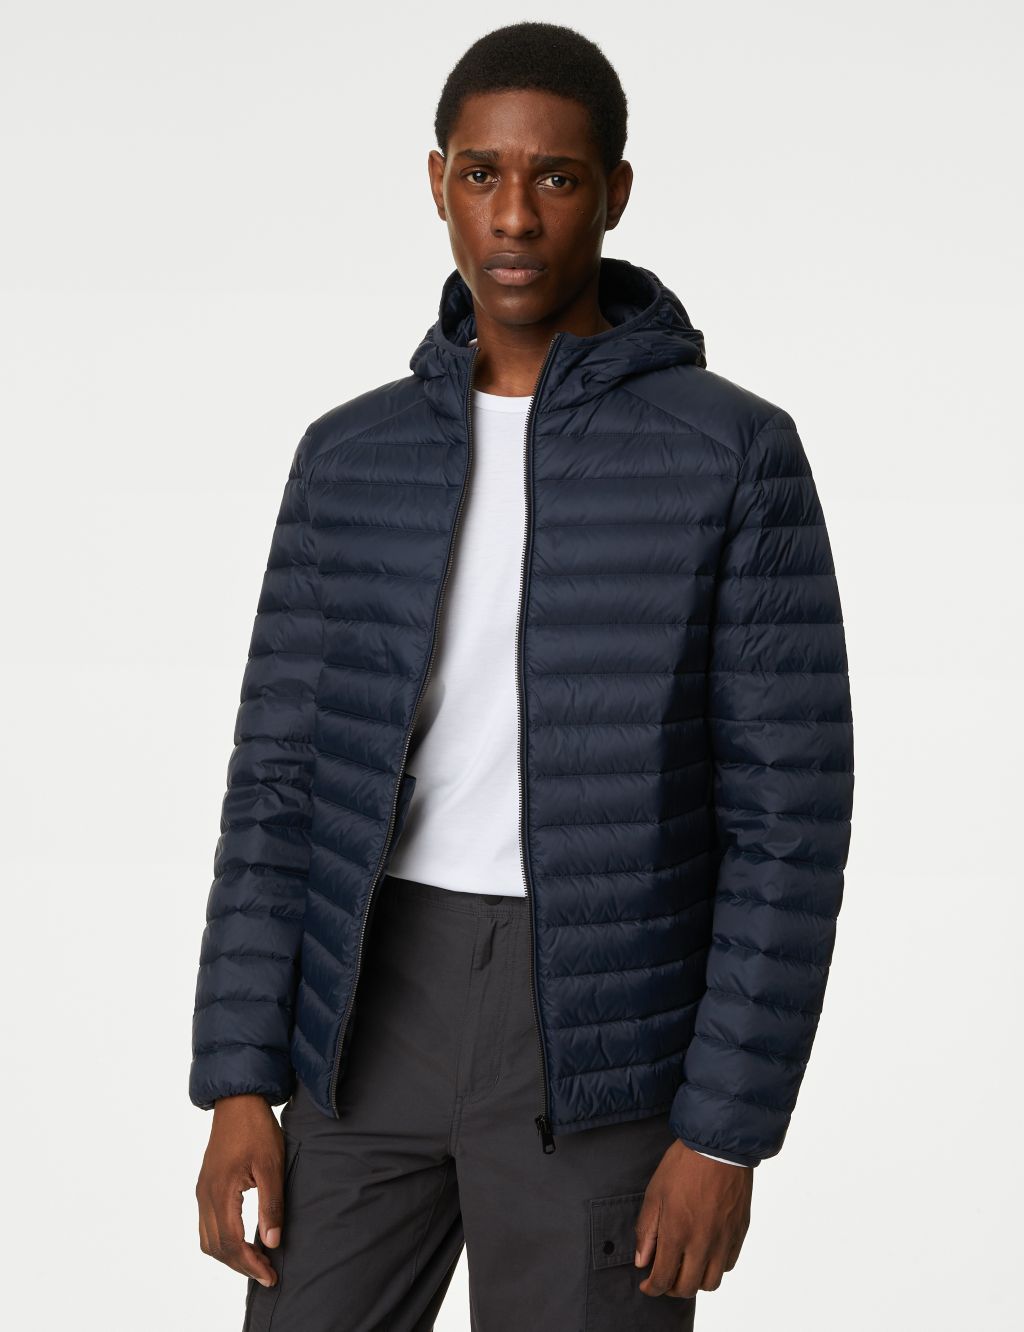 Feather and Down Jacket with Stormwear™ 2 of 7